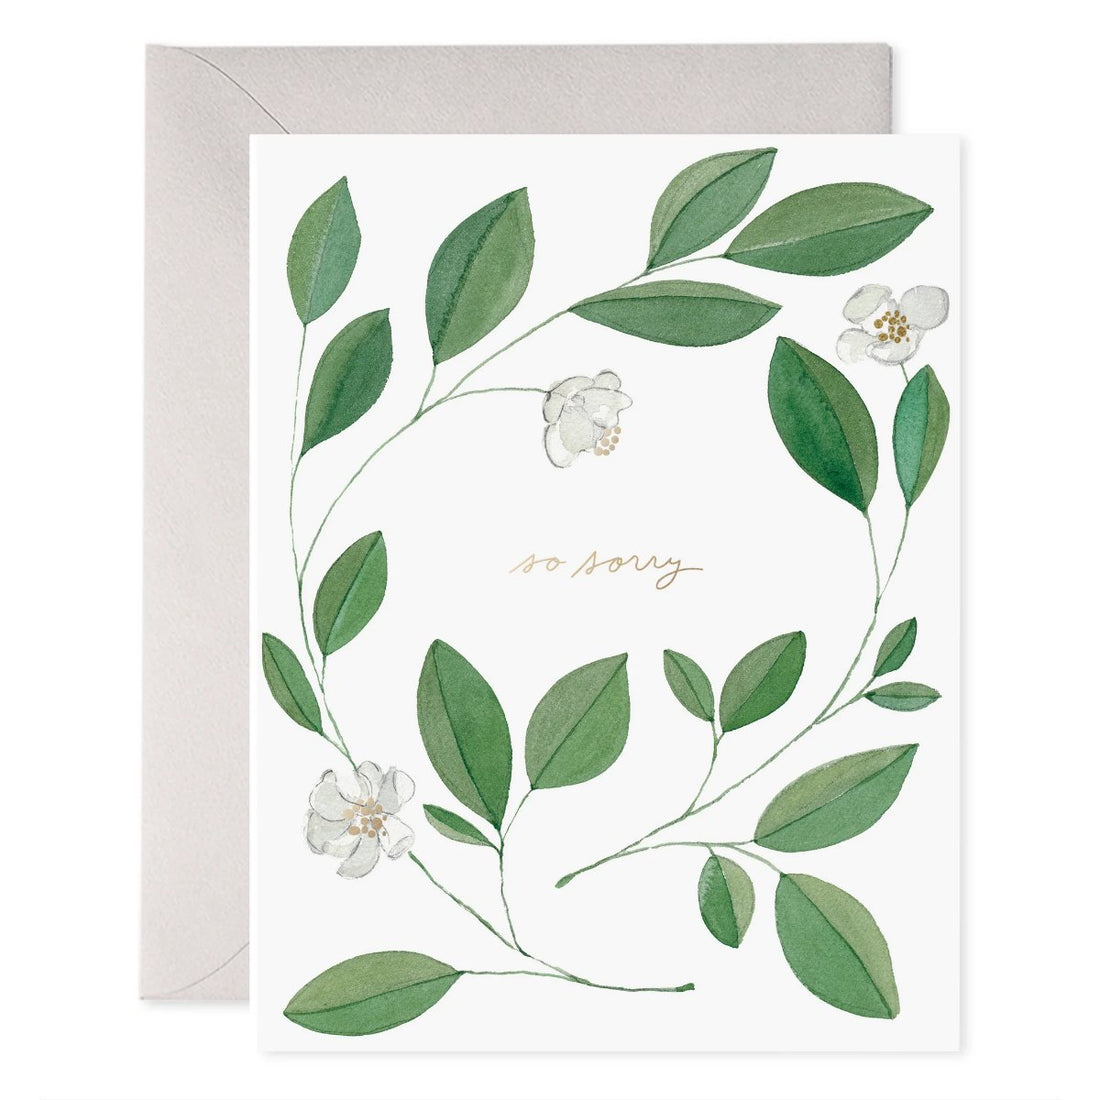 Sympathy Cards by E. Frances - The Flower Crate